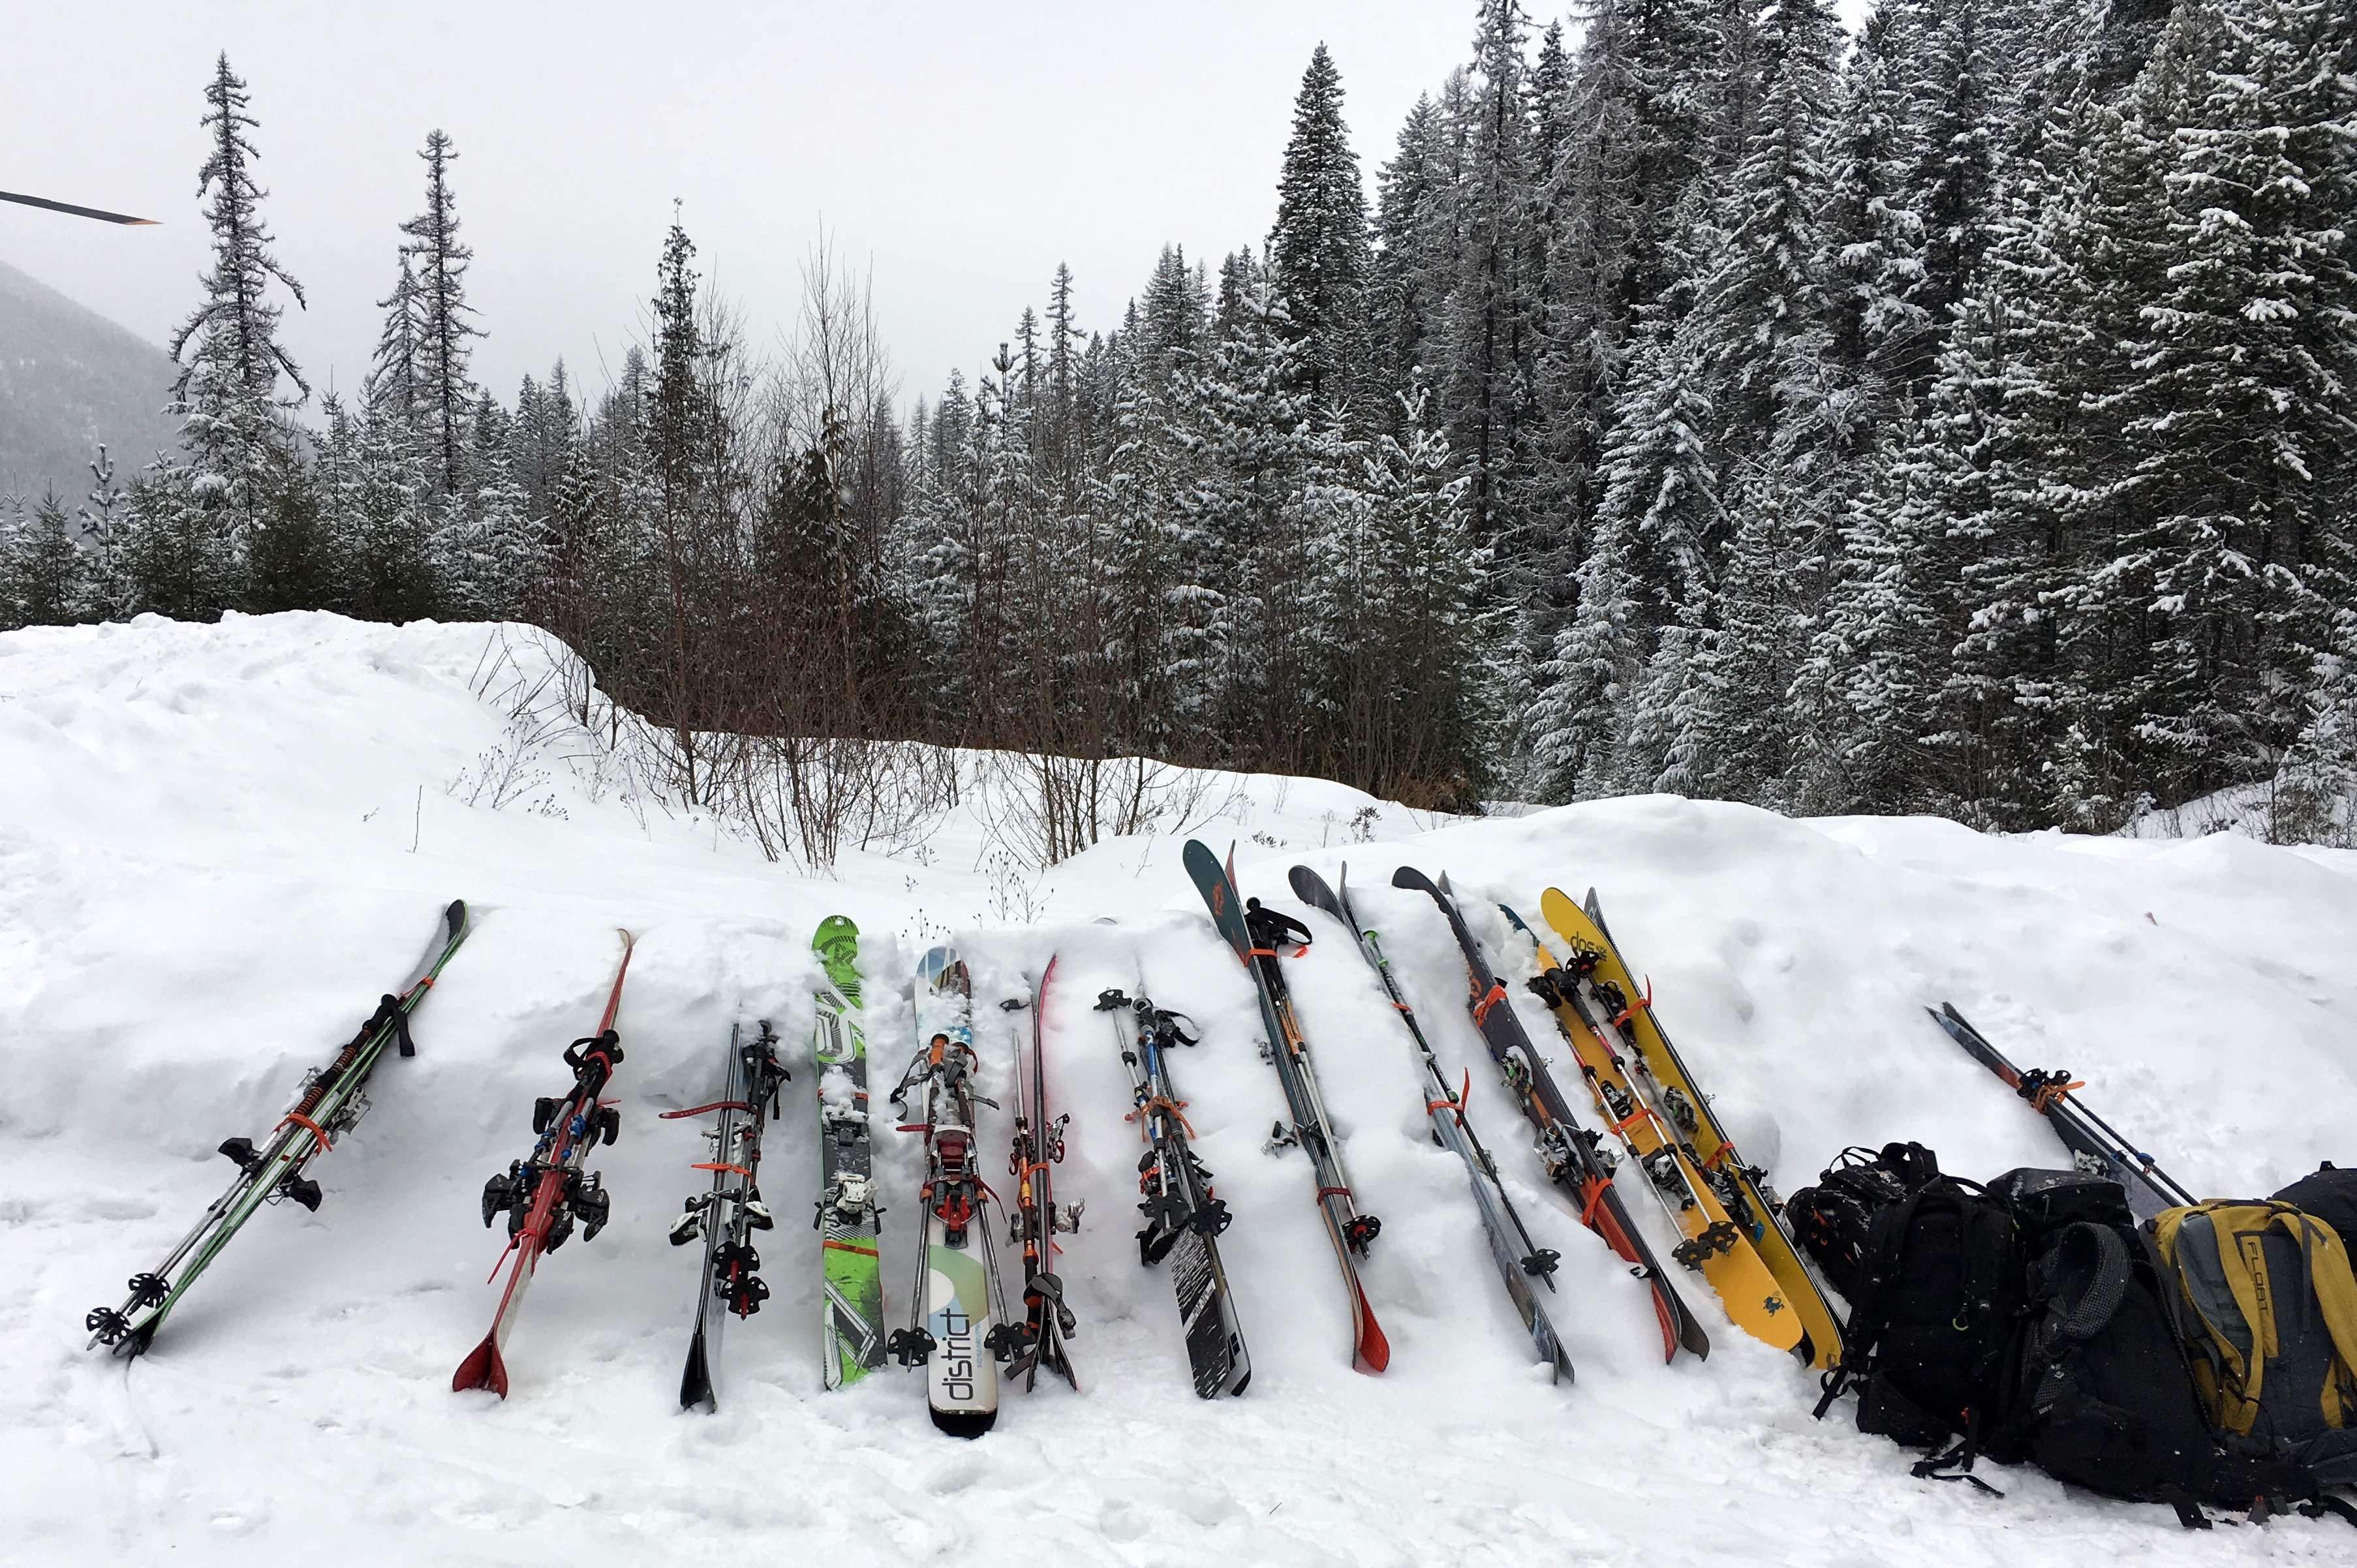 How To Pick Out Backcountry Ski Gear